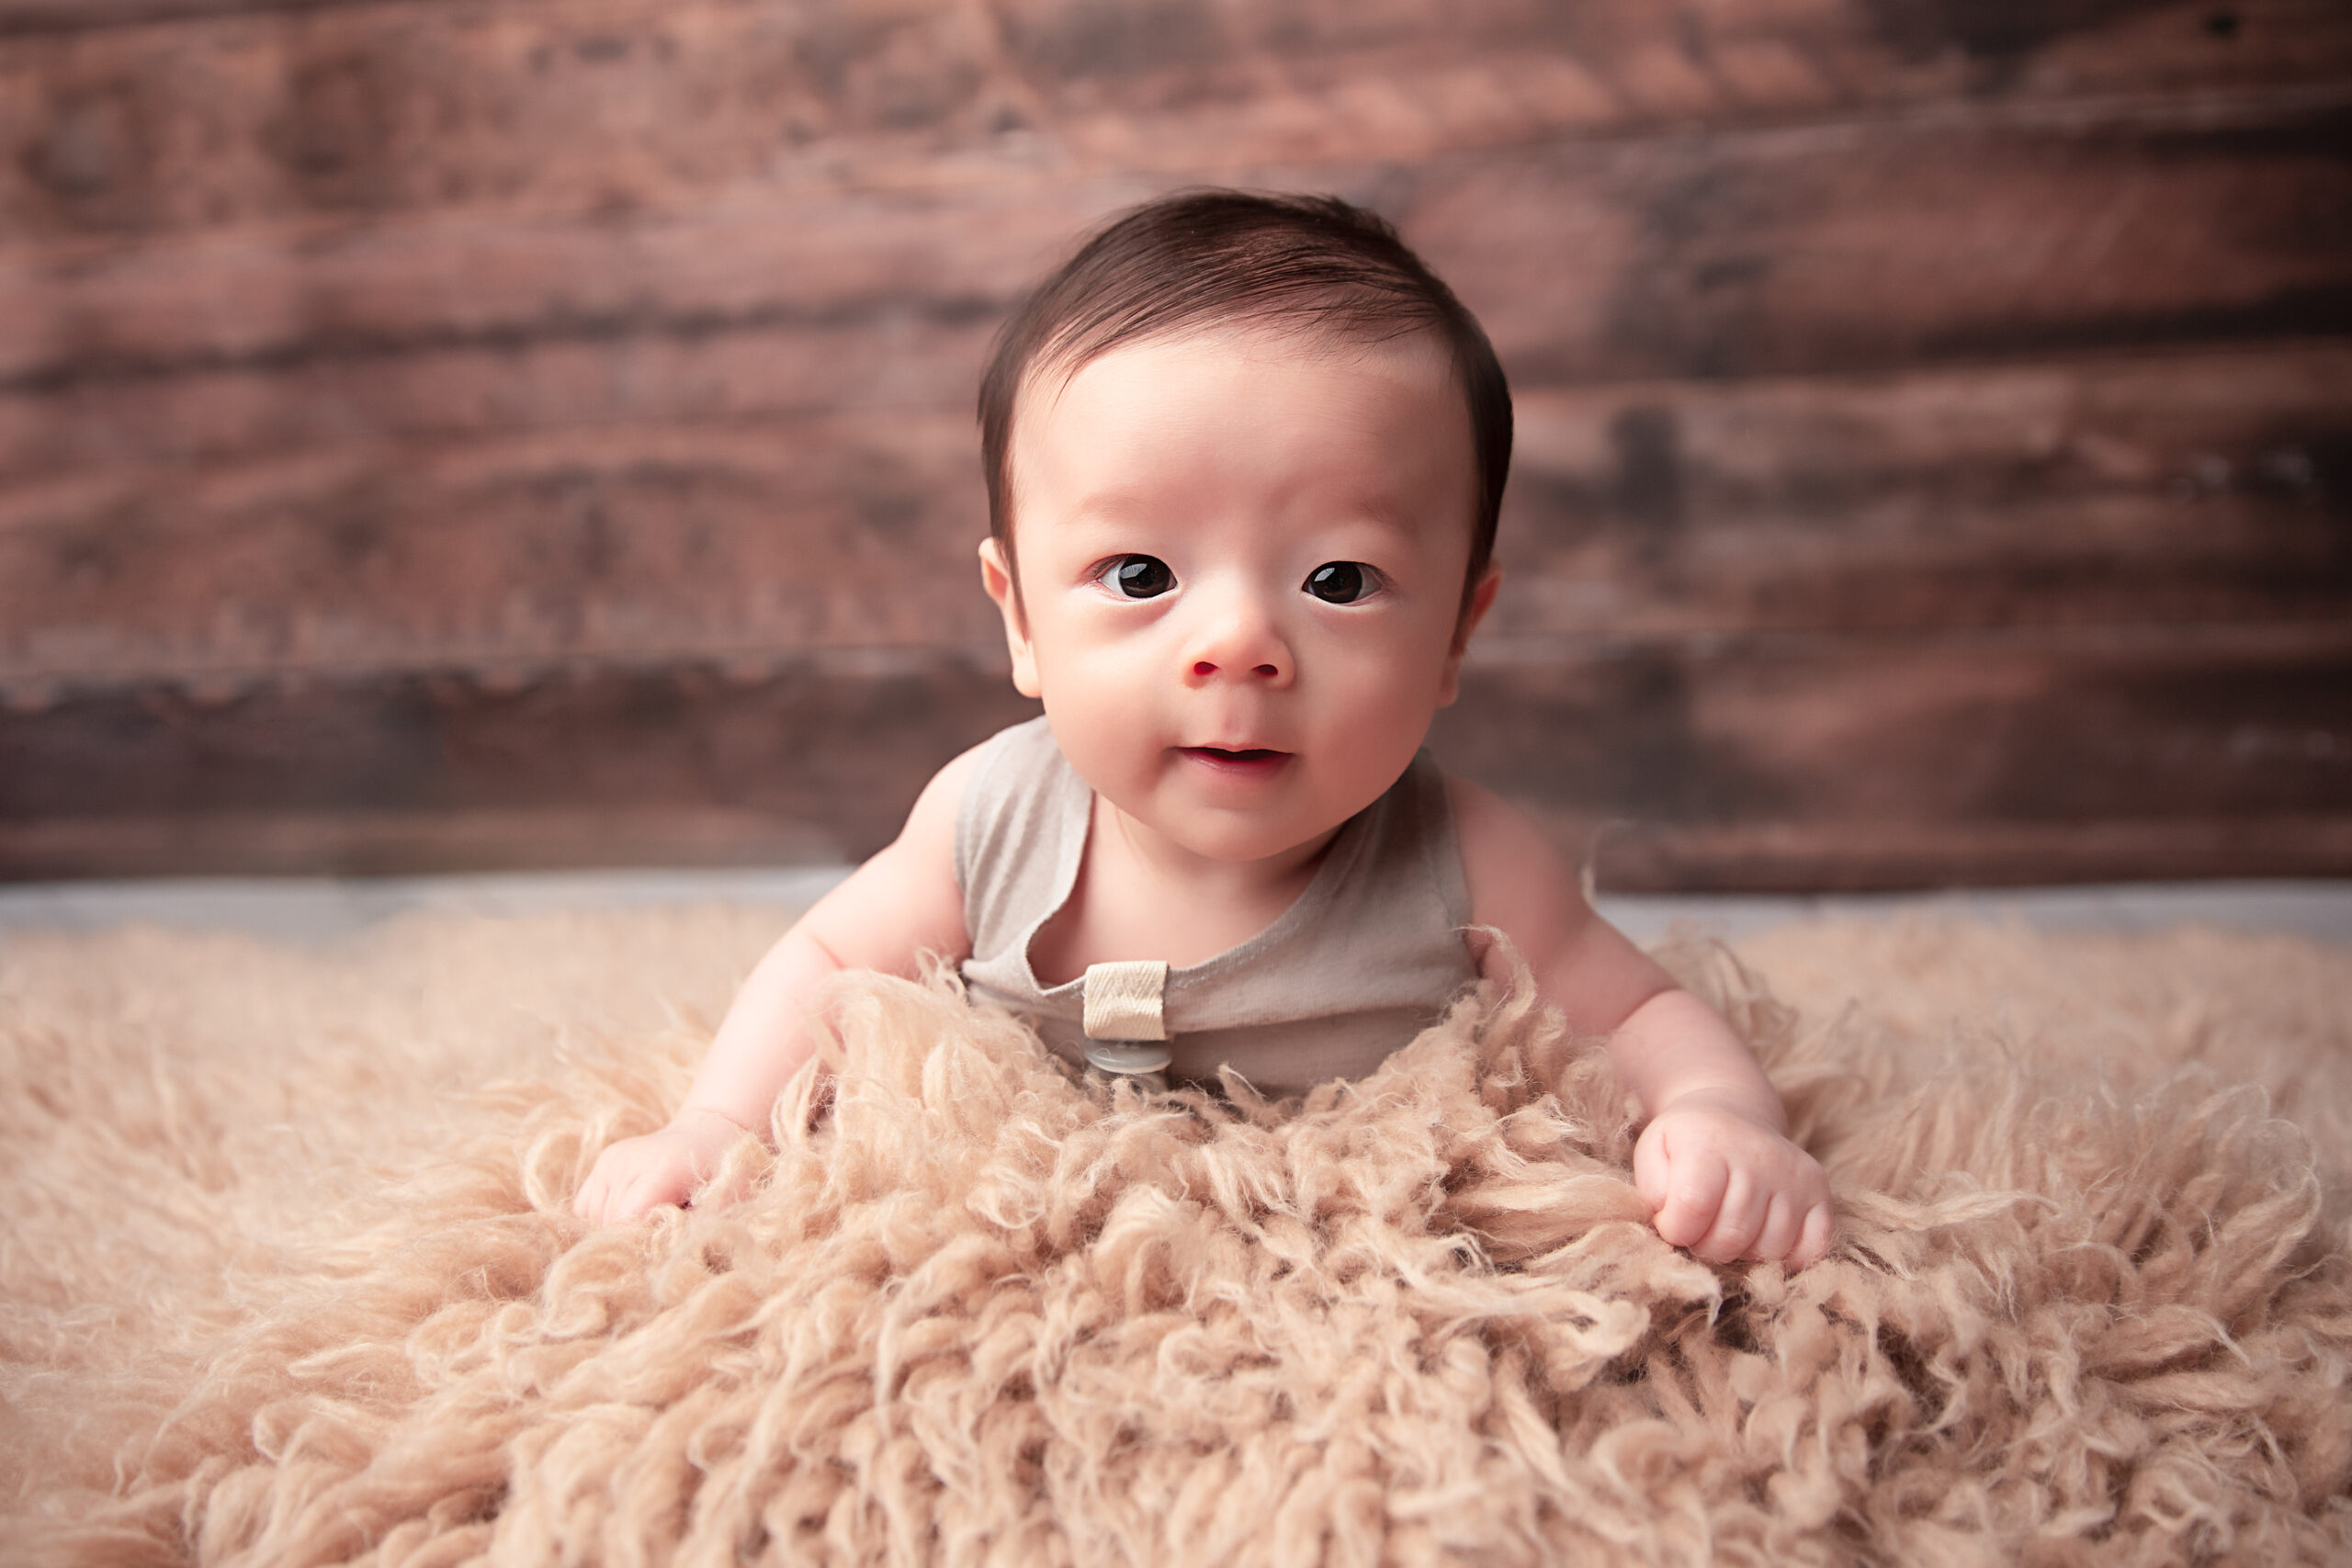 Baby Boy laying on belly wearing a neutral outfit and wood backdrop